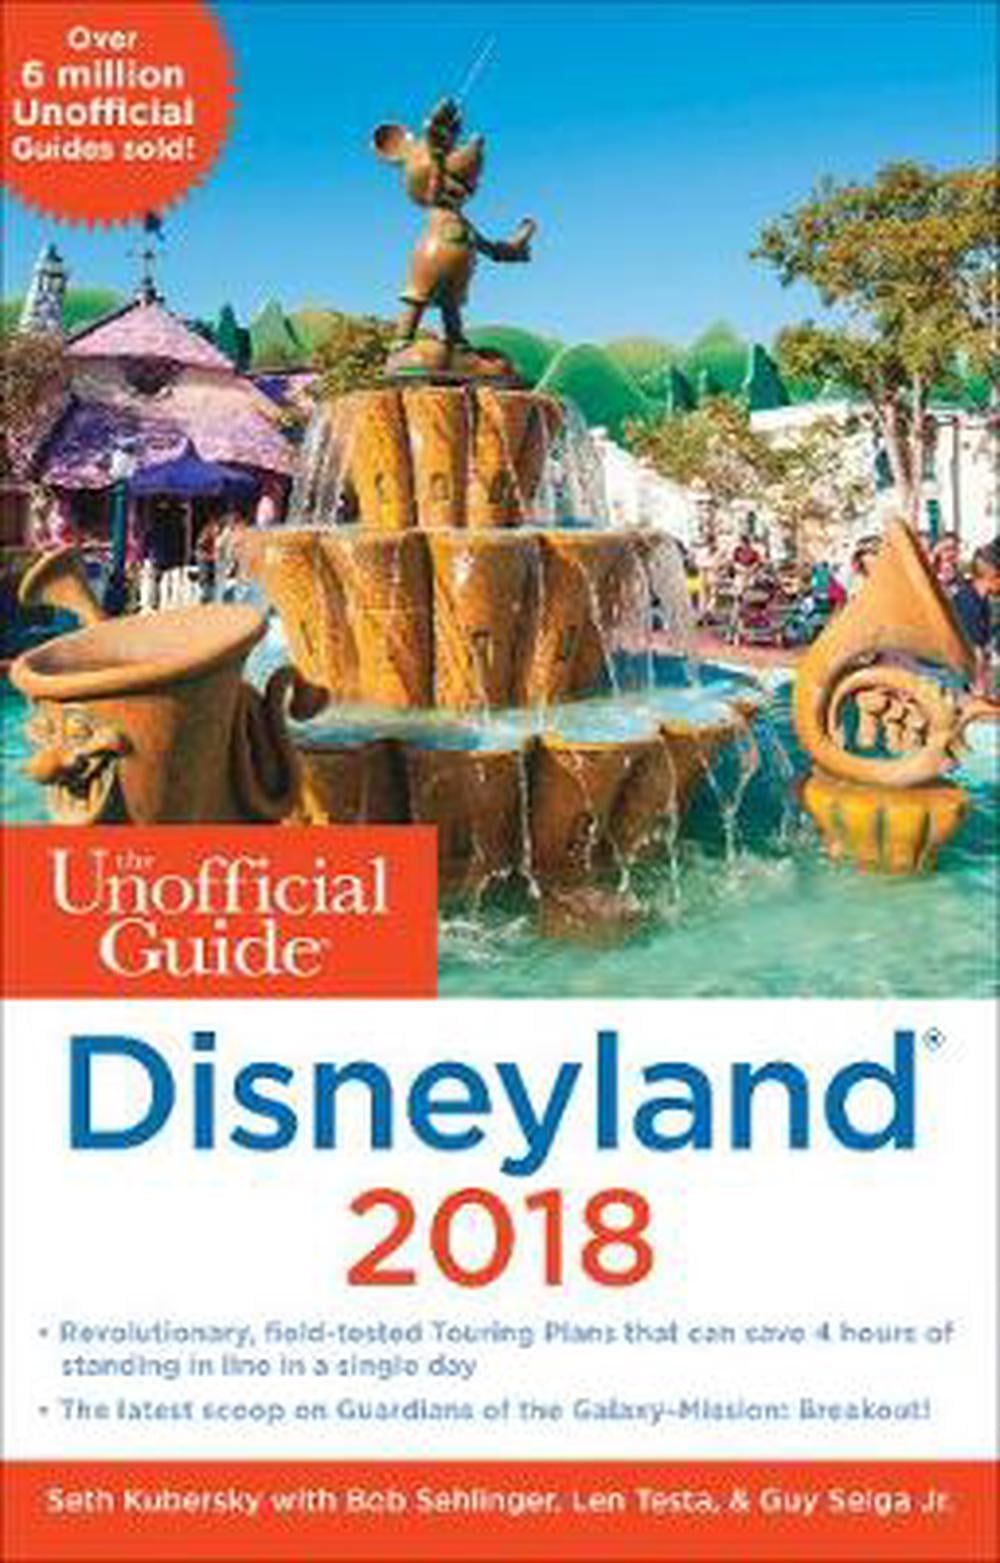 The Unofficial Guide to Disneyland 2018 (Paperback) - Walmart.com